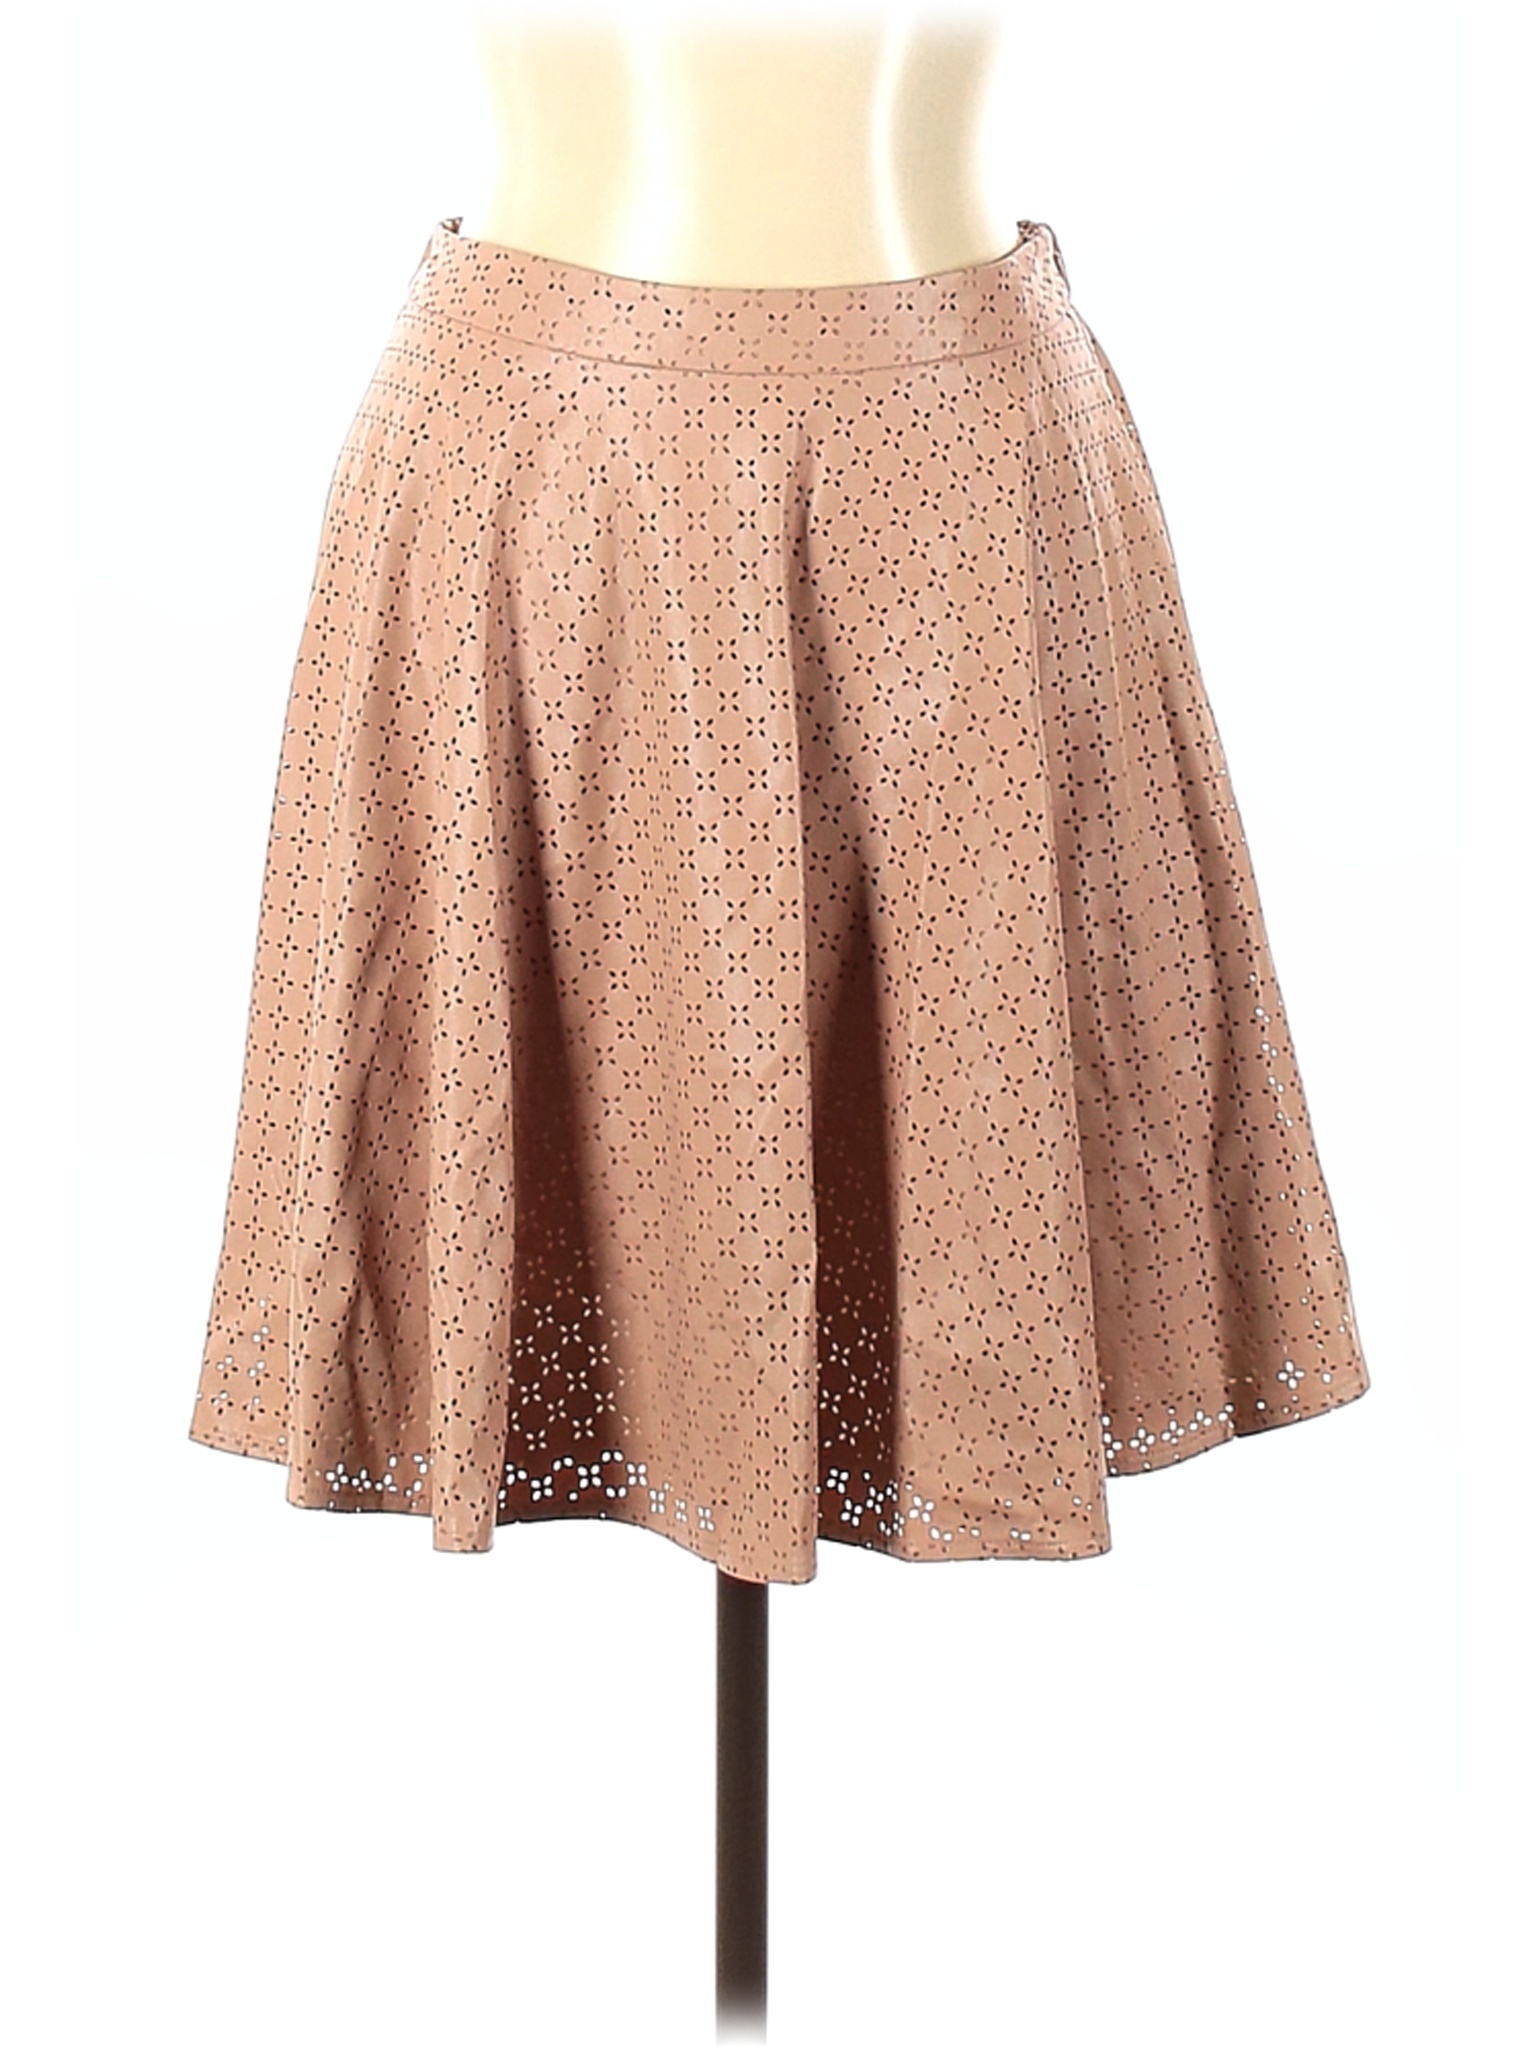 Sunday in Brooklyn 100% Polyurethane Brown Tan Faux Leather Skirt Size ...